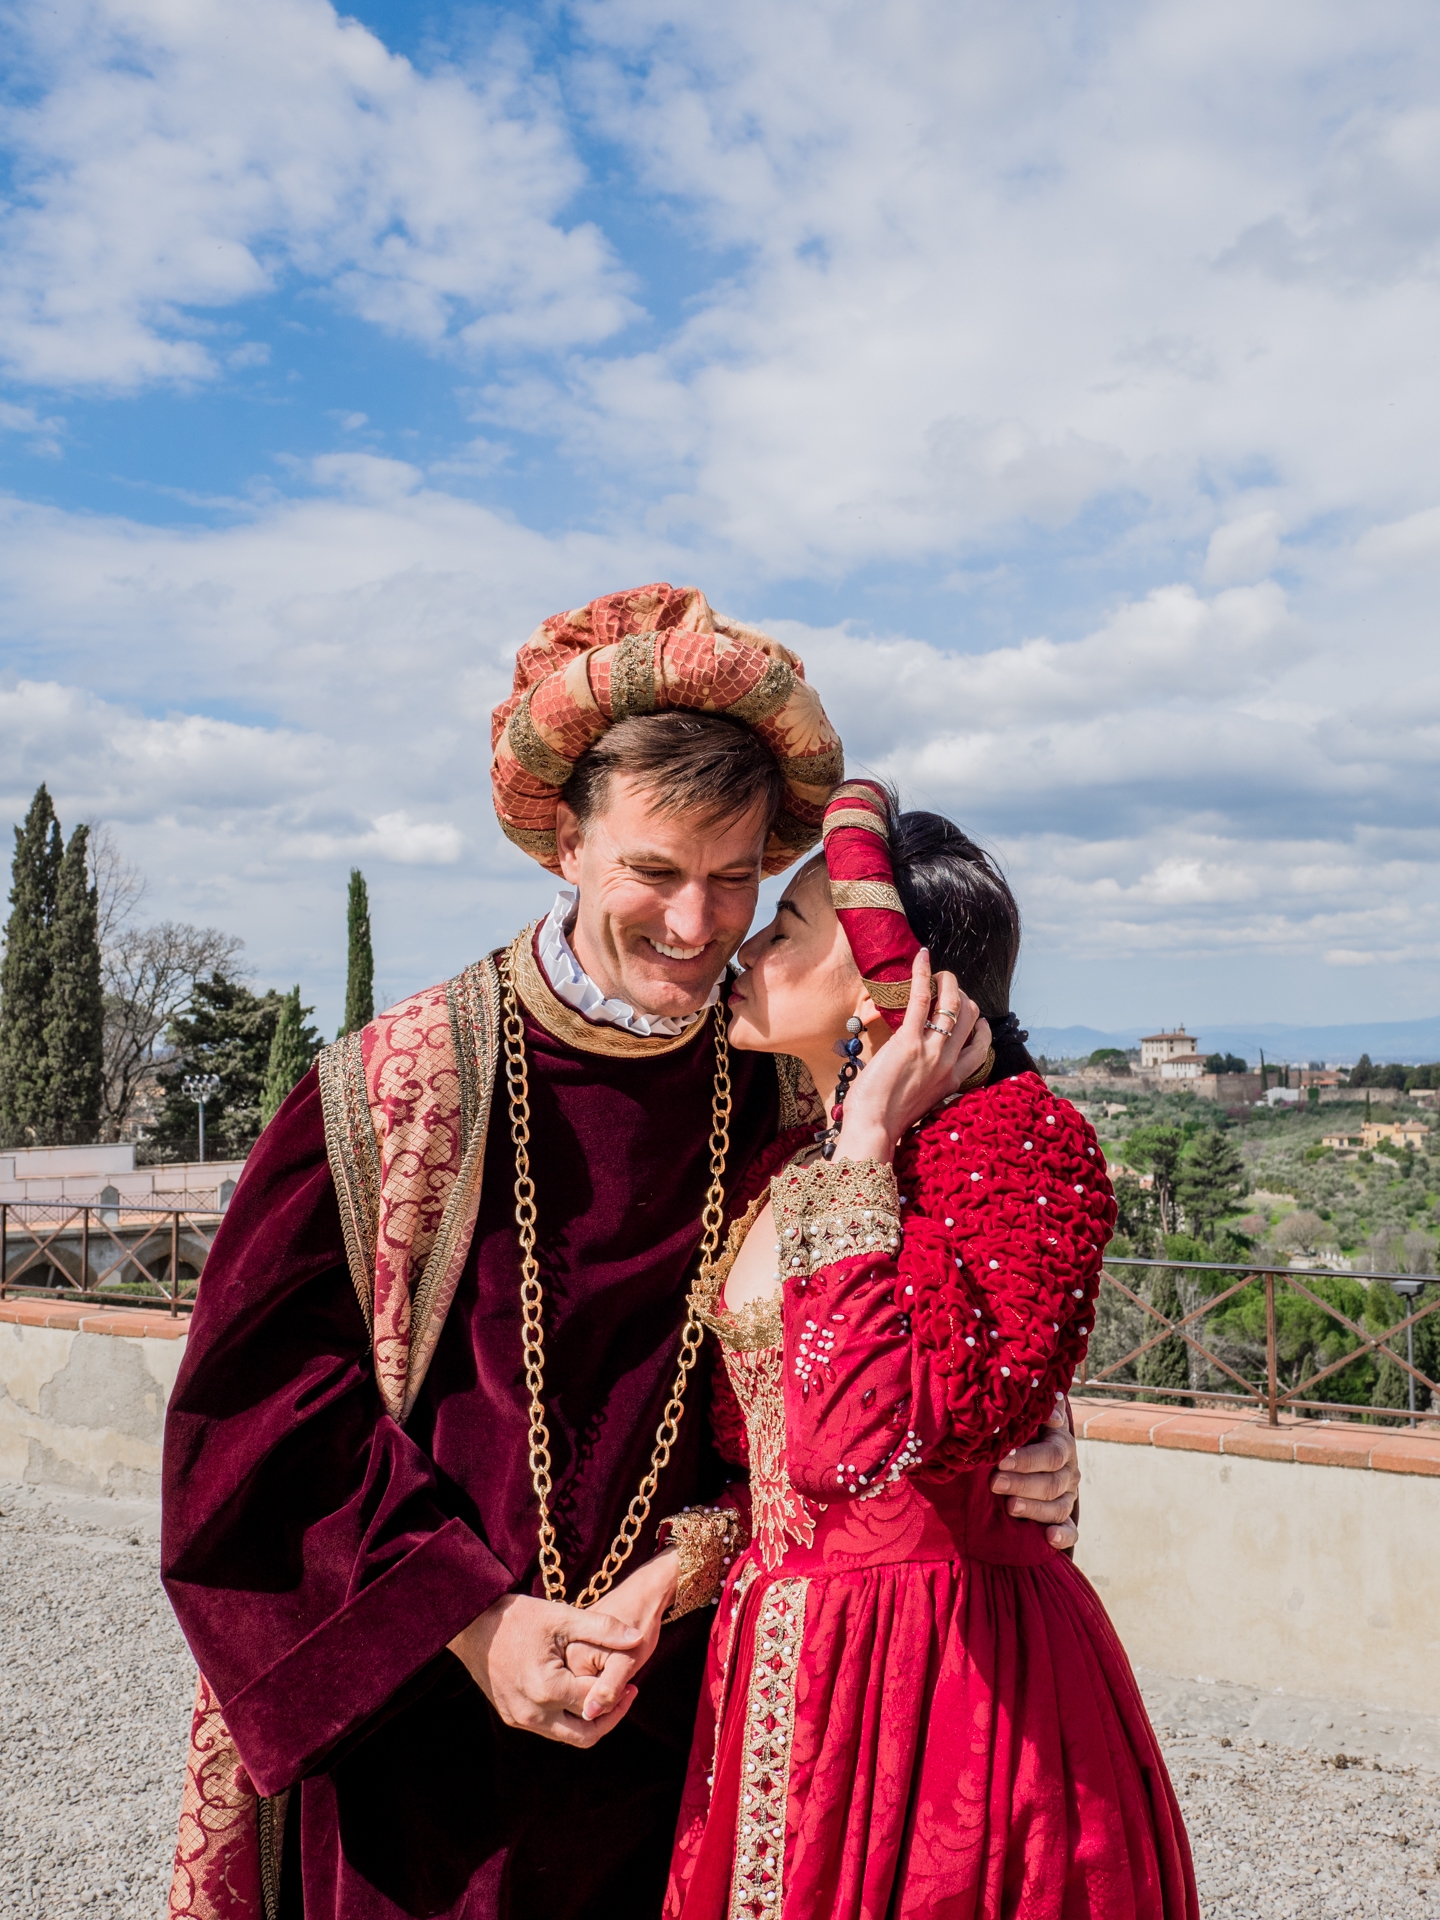 ﻿Book a Photoshoot in Florence Medieval Renaissance costumes